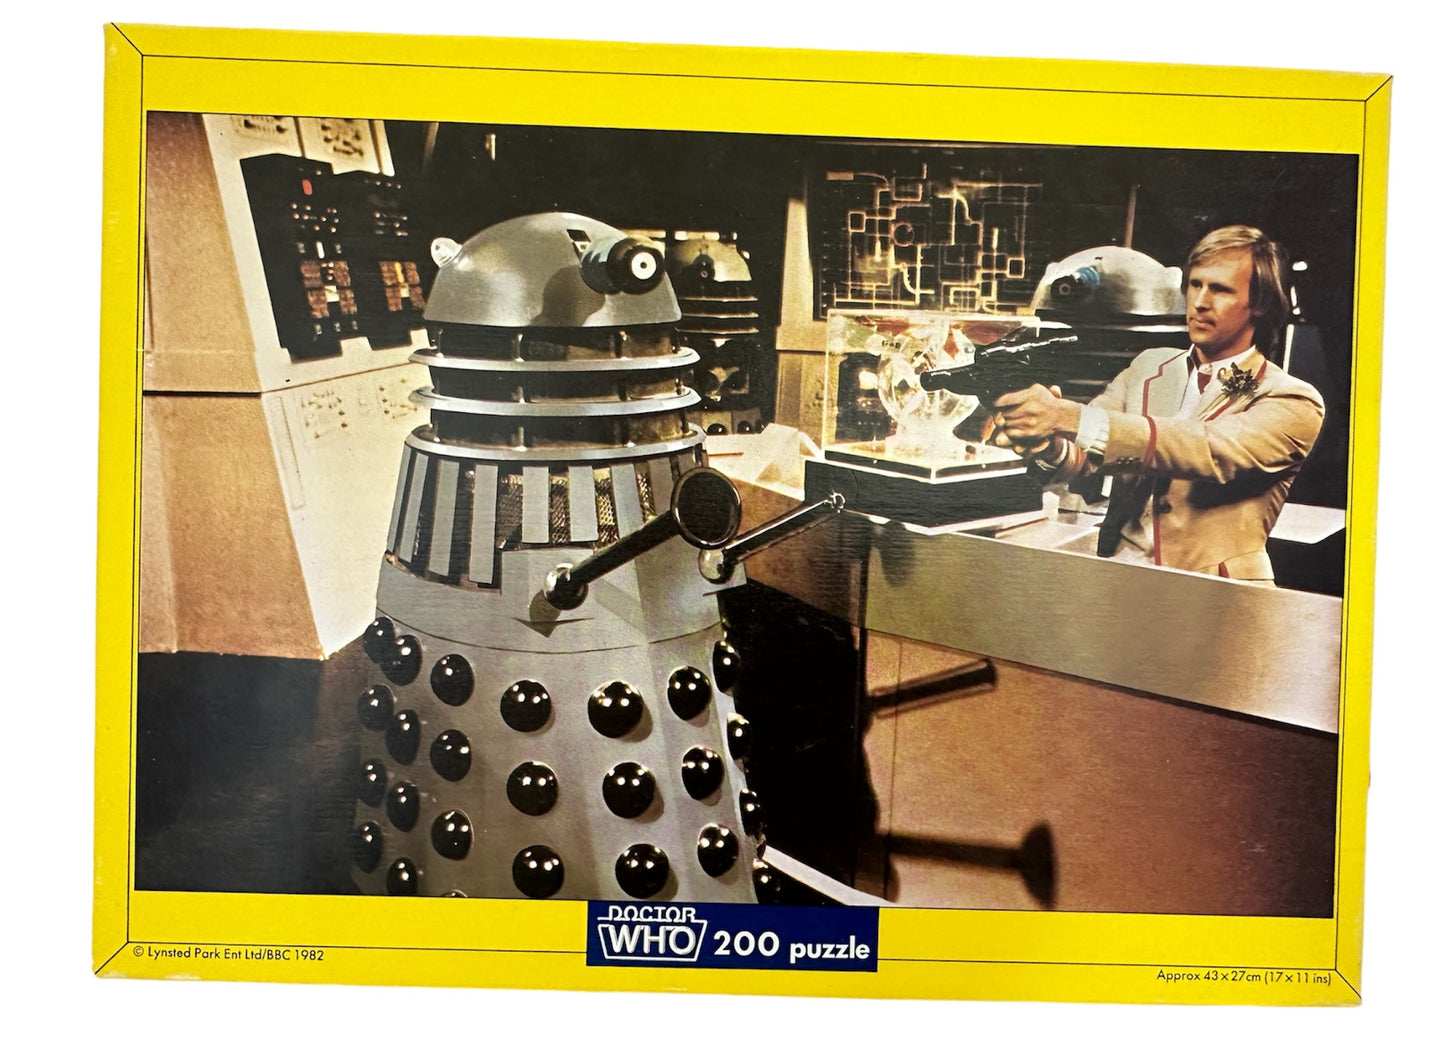 Vintage Doctor Dr Who 1982 Waddingtons 200 Piece Fully Interlocking Jigsaw Puzzle Featuring Peter Davison And The Daleks - Brand New Factory Sealed Shop Stock Room Find